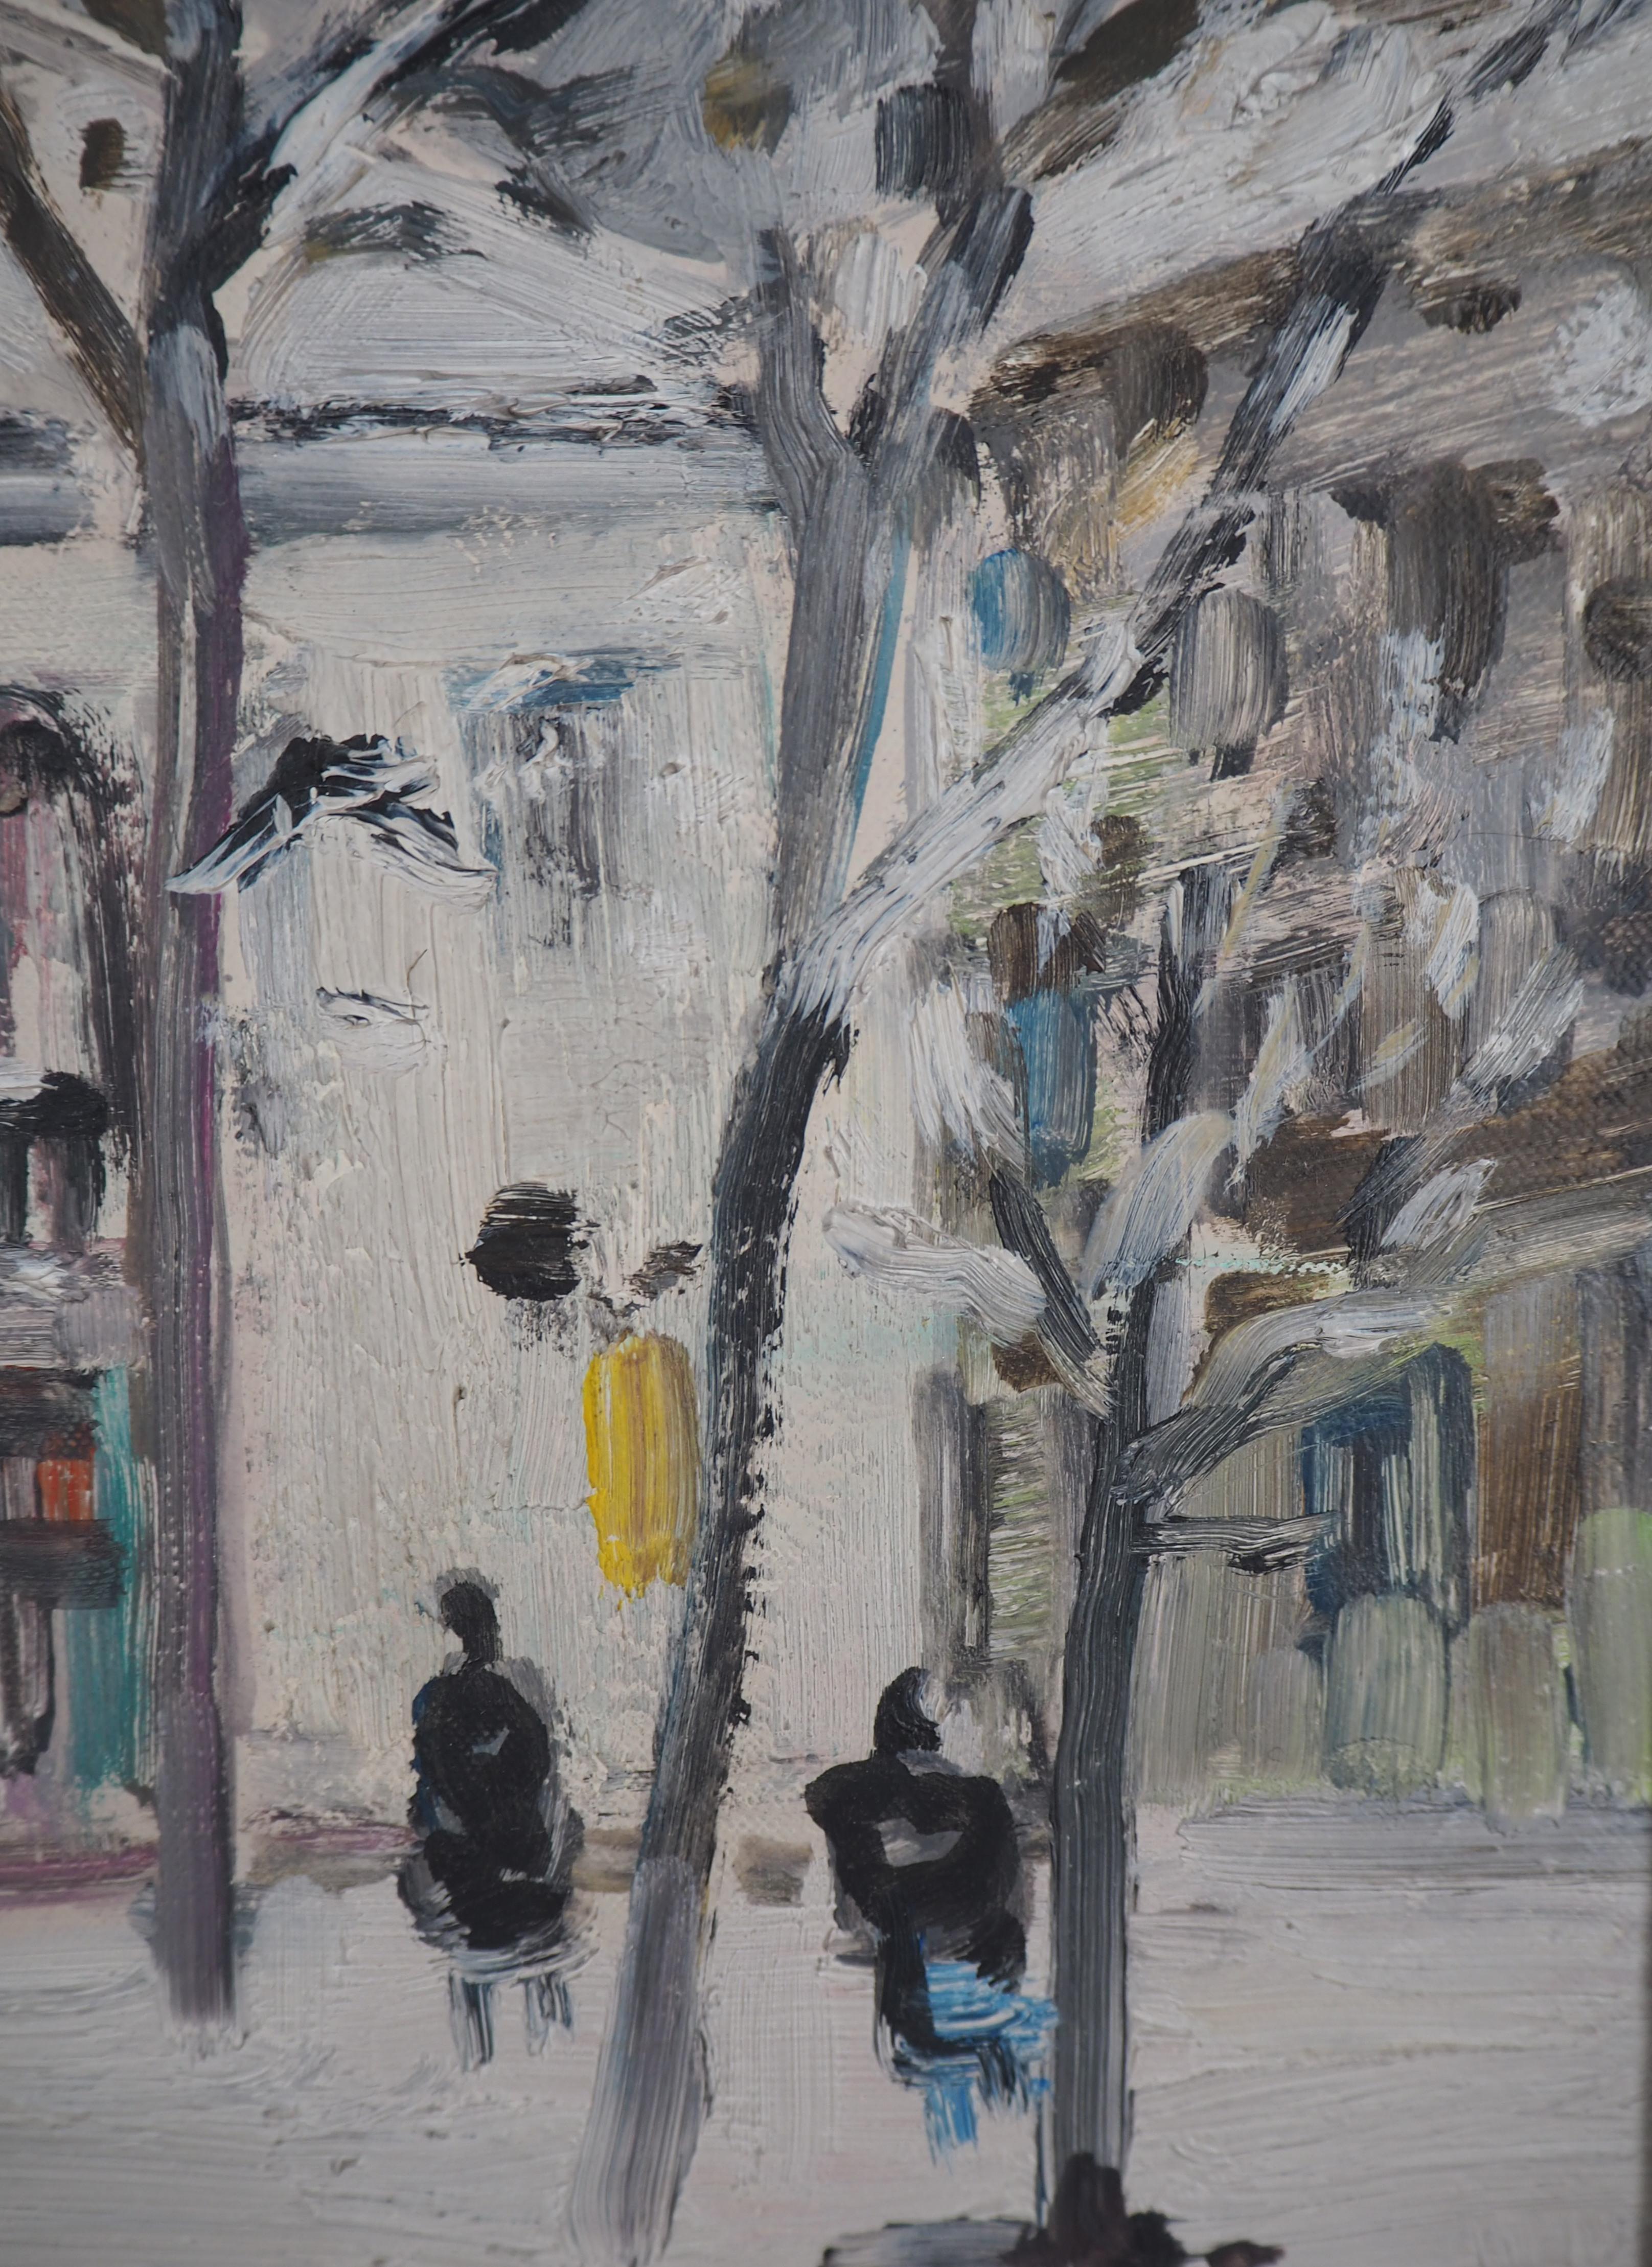 Paris : Snow on Atelier Theater in Montmartre - Original oil on canvas, signed 1